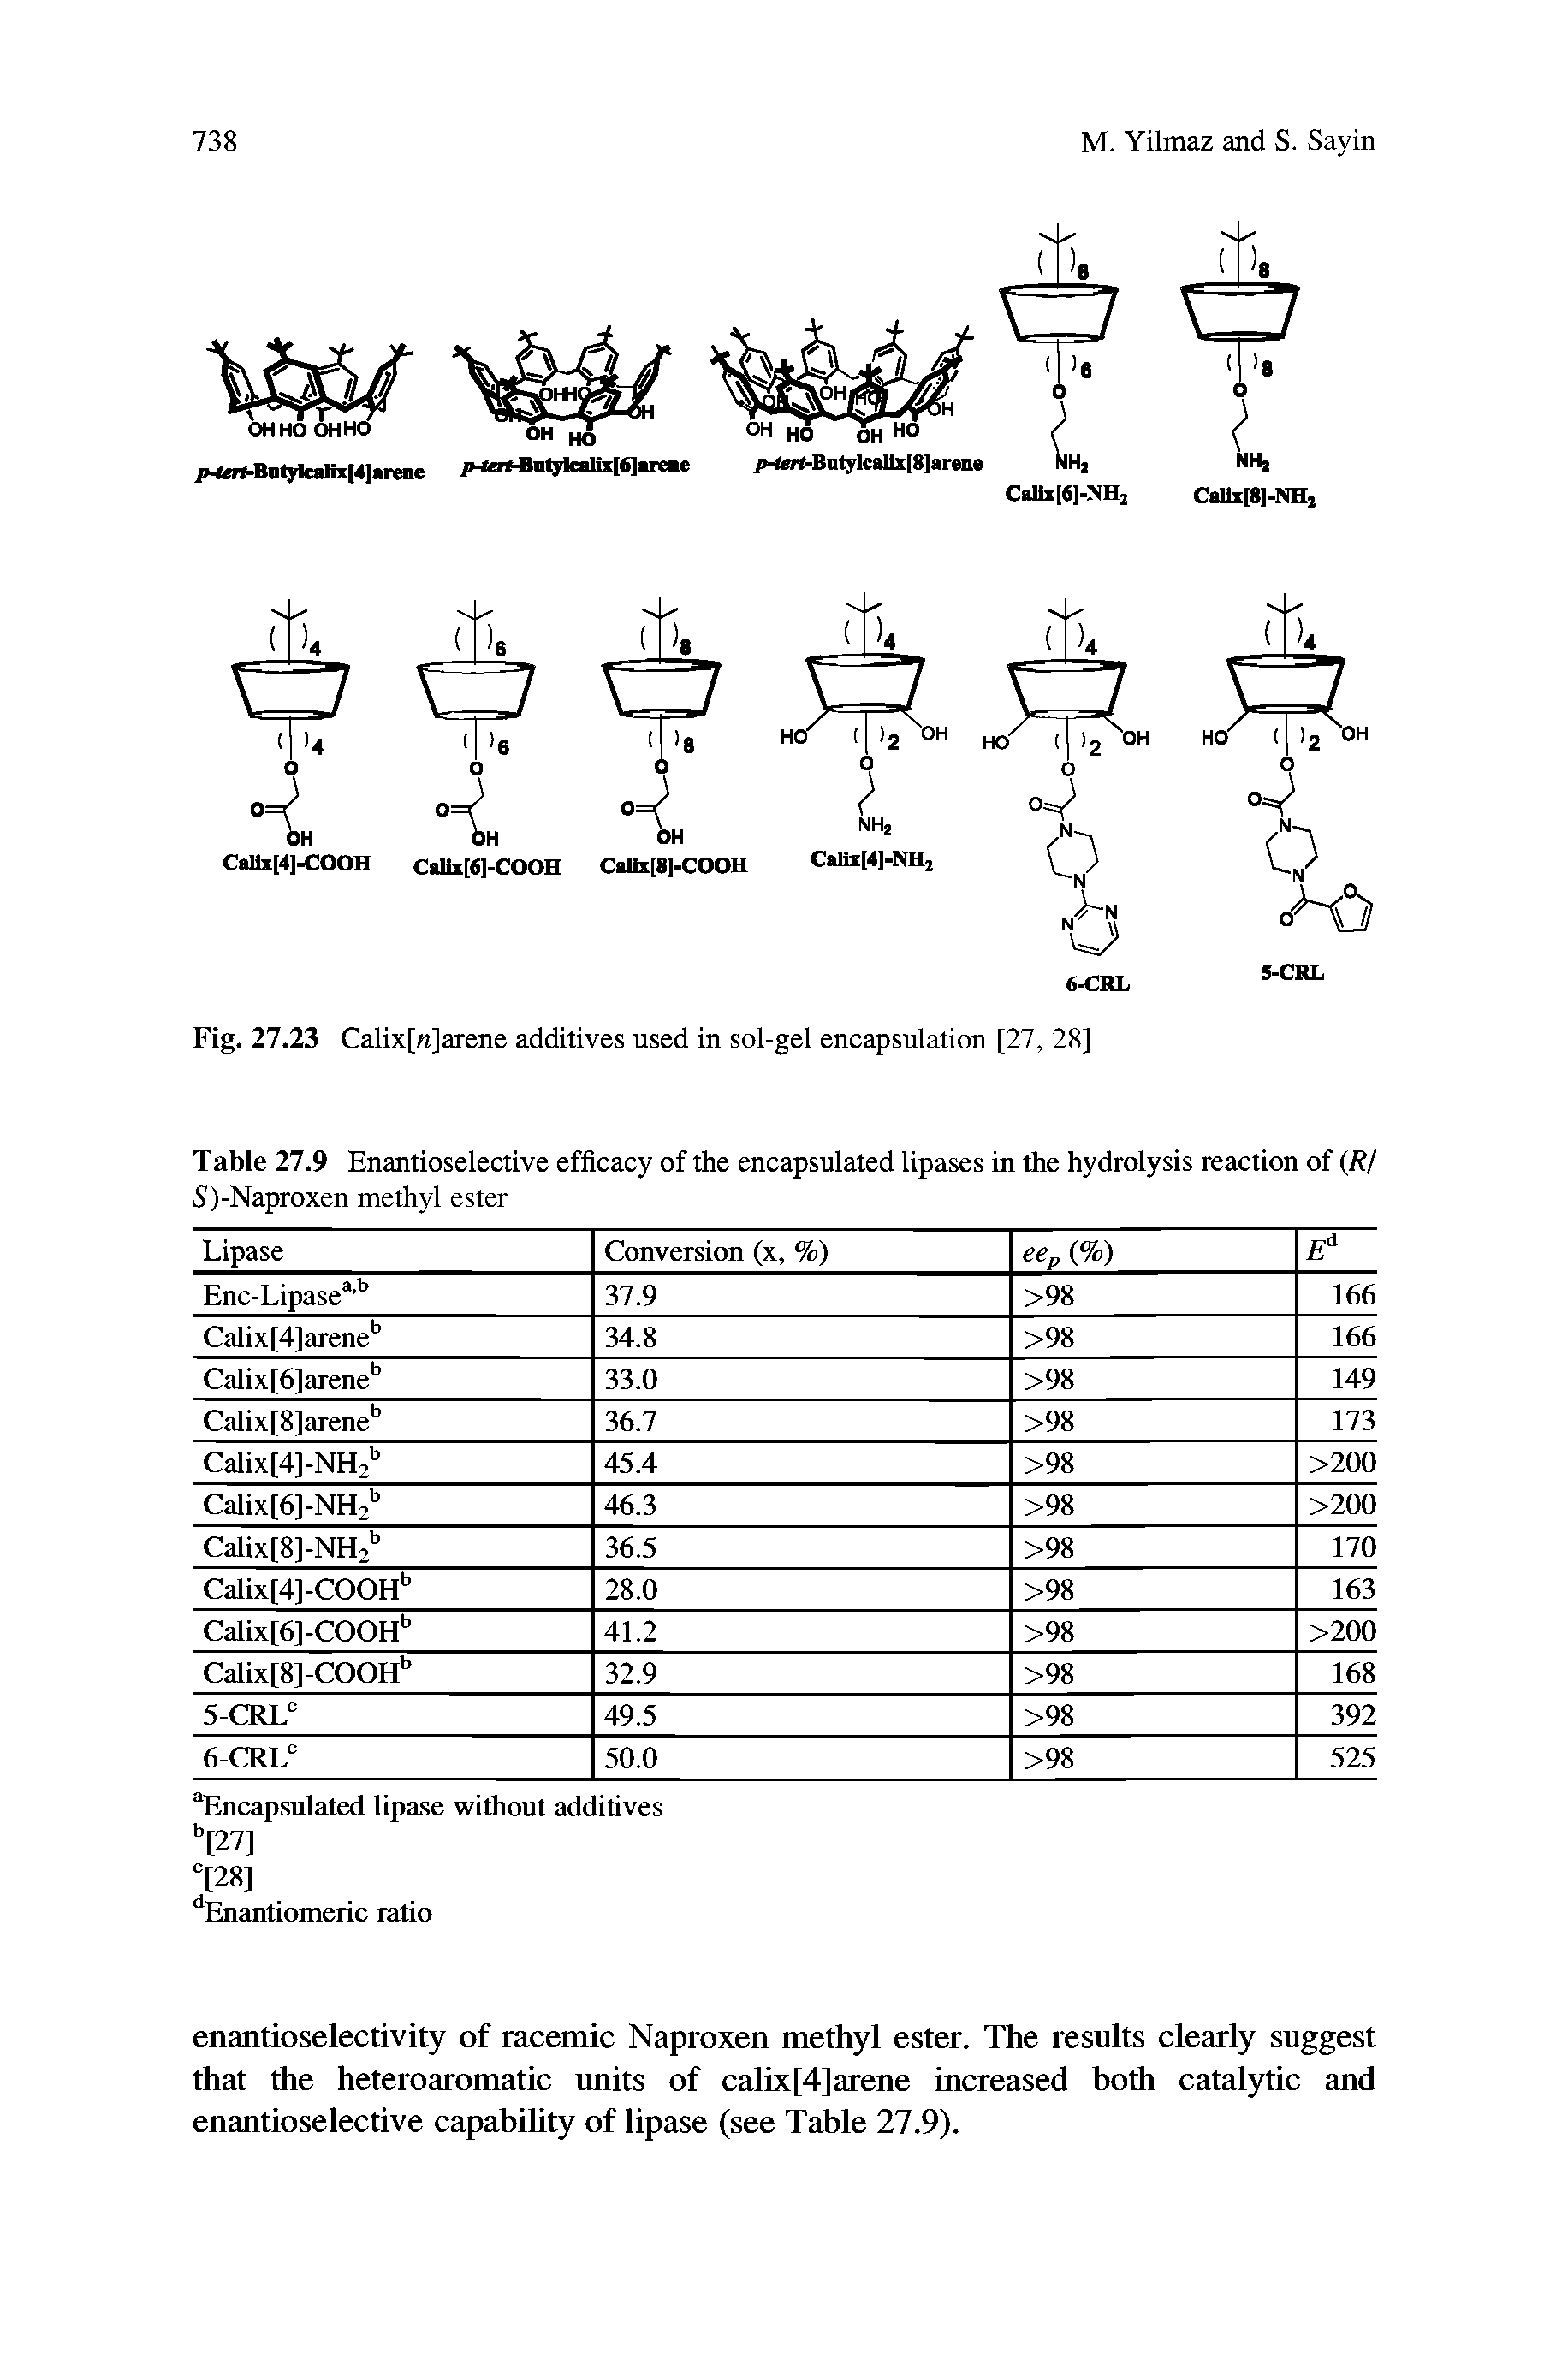 Table 27.9 Enantioselective efficacy of the encapsulated lipases in the hydrolysis reaction of (R/ 5)-Naproxen methyl ester...